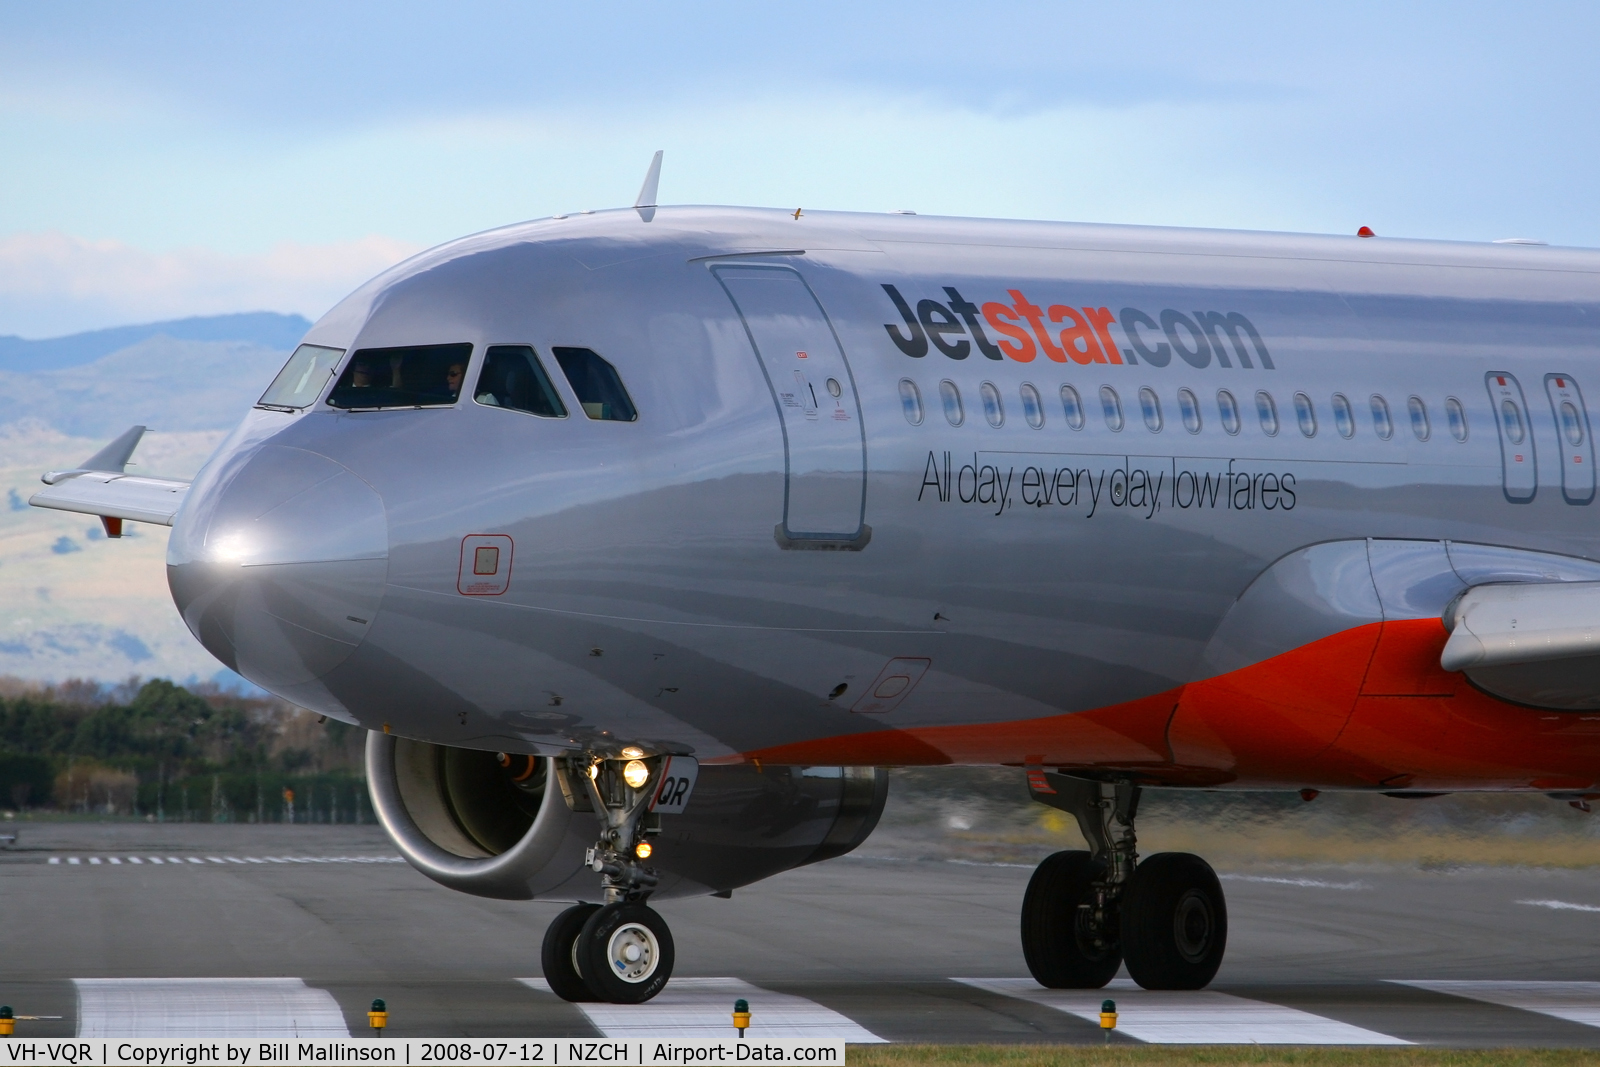 VH-VQR, 2005 Airbus A320-232 C/N 2526, turning onto taxiway at end of 29